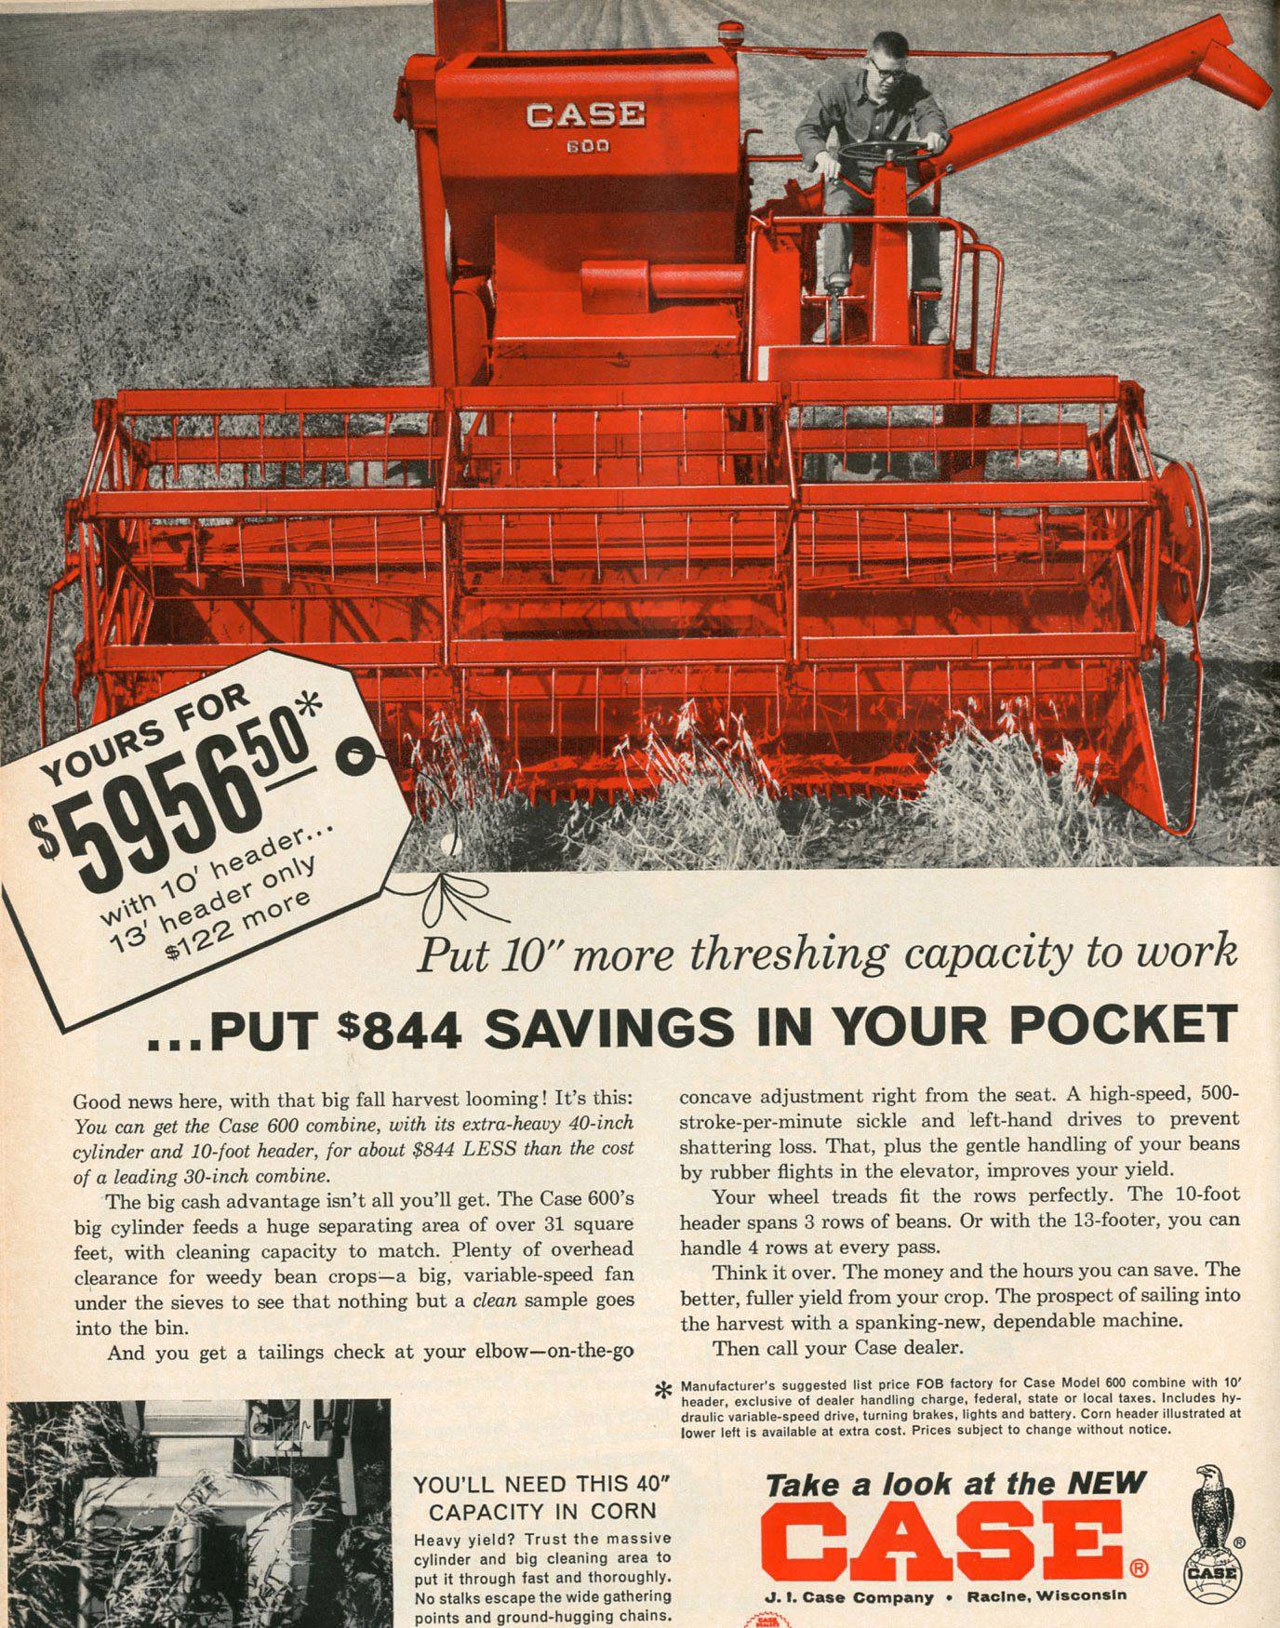 Put 10'' more threshing capacity to work ...PUT $844 SAVINGS IN YOUR POCKET 
Good news here, with that big fall harvest looming ! It's this: You can get the Case 600 combine, with its extra-heavy 40-inch cylinder and 10-foot header, for about $844 LESS than the cost of a leading 30-inch combine. The big cash advantage isn't all you'll get. The Case 600's big cylinder feeds a huge separating area of over 31 square feet, with cleaning capacity to match. Plenty of overhead clearance for weedy bean crops—a big, variable-speed fan under the sieves to see that nothing but a clean sample goes into the bin. And you get a tailings check at your elbow—on-the-go 

concave adjustment right from the seat. A high-speed, 500-stroke-per-minute sickle and left-hand drives to prevent shattering loss. That, plus the gentle handling of your beans by rubber flights in the elevator, improves your yield. Your wheel treads fit the rows perfectly. The 10-foot header spans 3 rows of beans. Or with the 13-footer, you can handle 4 rows at every pass. Think it over. The money and the hours you can save. The better, fuller yield from your crop. The prospect of sailing into the harvest with a spanking-new, dependable machine. Then call your Case dealer. * Manufacturer's suggested list price FOB factory for Case Model 600 combine with 10' header, exclusive of dealer handling charge, federal, state or local taxes. Includes hy-draulic variable-speed drive, turning brakes, lights and battery. Corn header illustrated at lower left is available at extra cost. Prices subject to change without notice. 
YOU'LL NEED THIS 40'' CAPACITY IN CORN Heavy yield? Trust the massive cylinder and big cleaning area to put it through fast and thoroughly. No stalks escape the wide gathering points and ground-hugging chains. 
Take a look at the NEW 
SE® 
J. 1. Case Company • Racine, Wisconsin